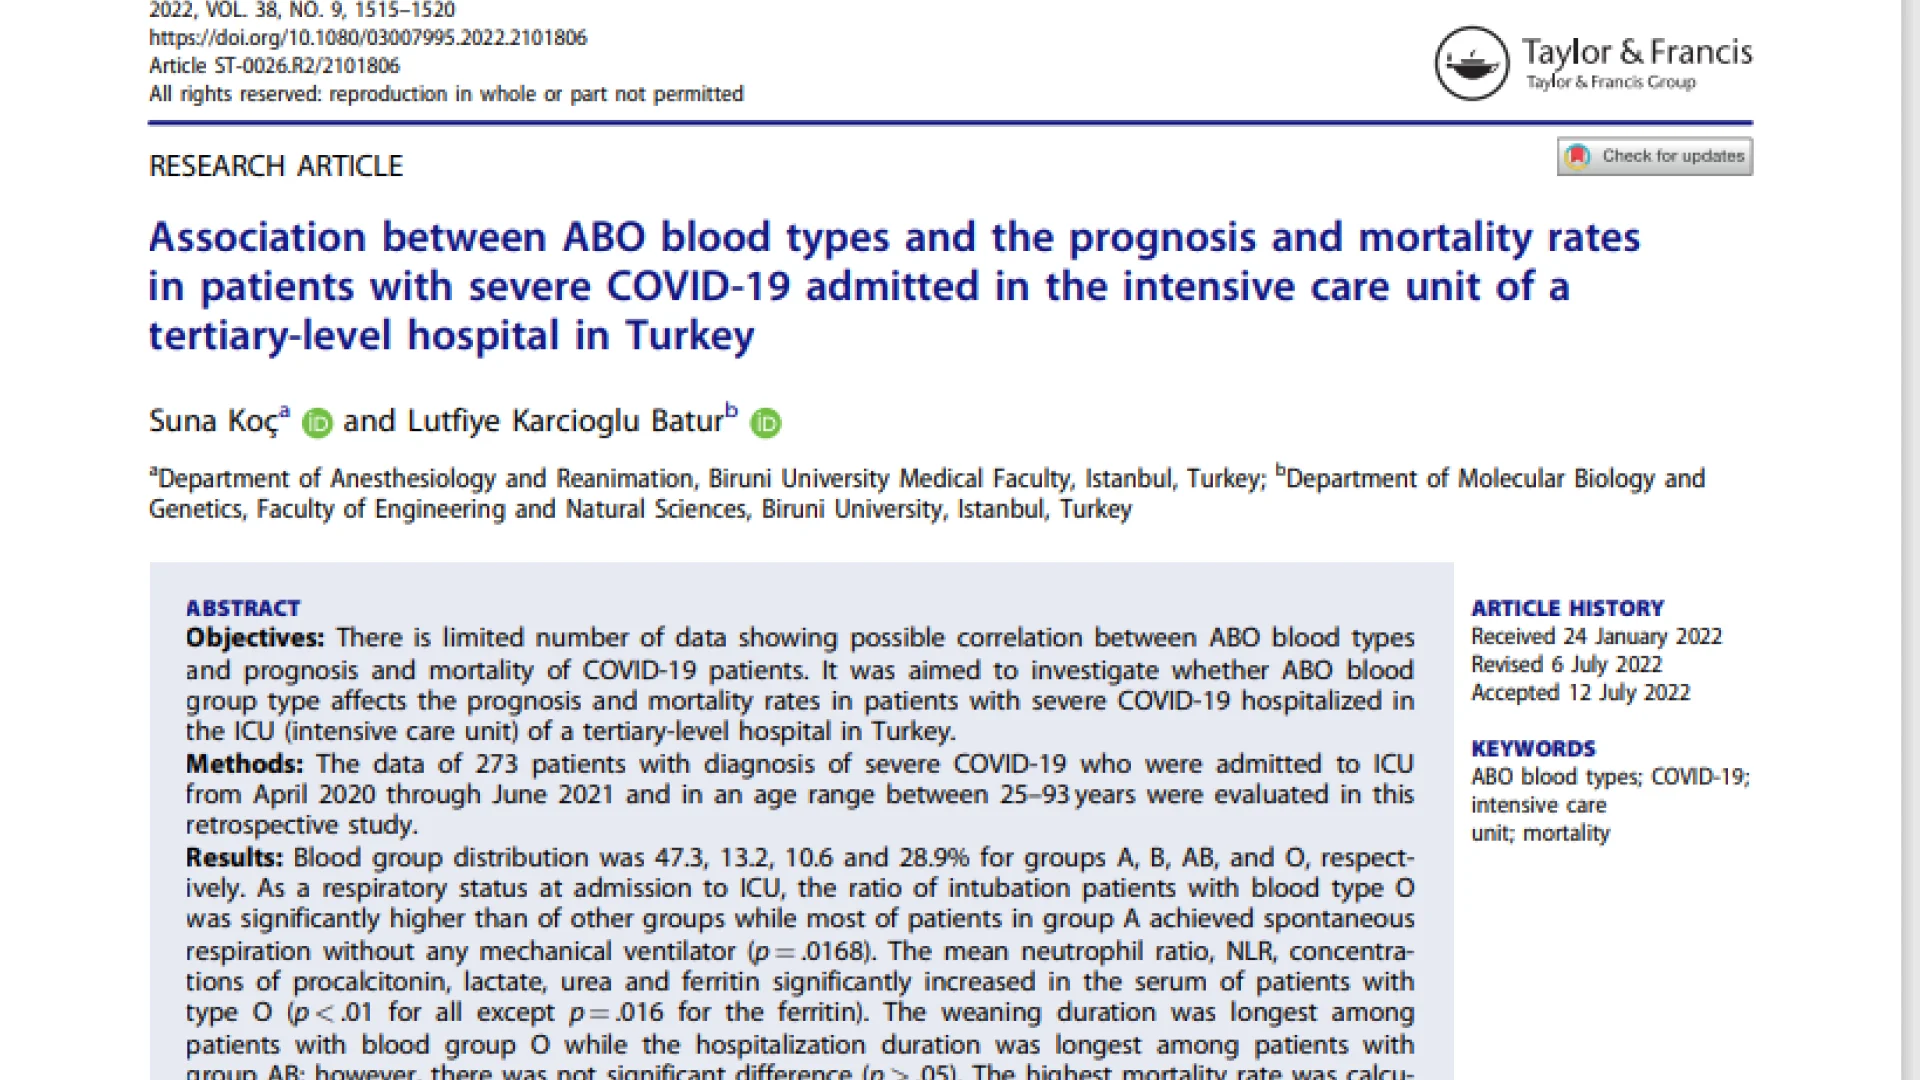 Association between ABO blood types and the prognosis and mortality rates in patients with severe COVID-19 admitted in the intensive care unit of a tertiary-level hospital in Turkey